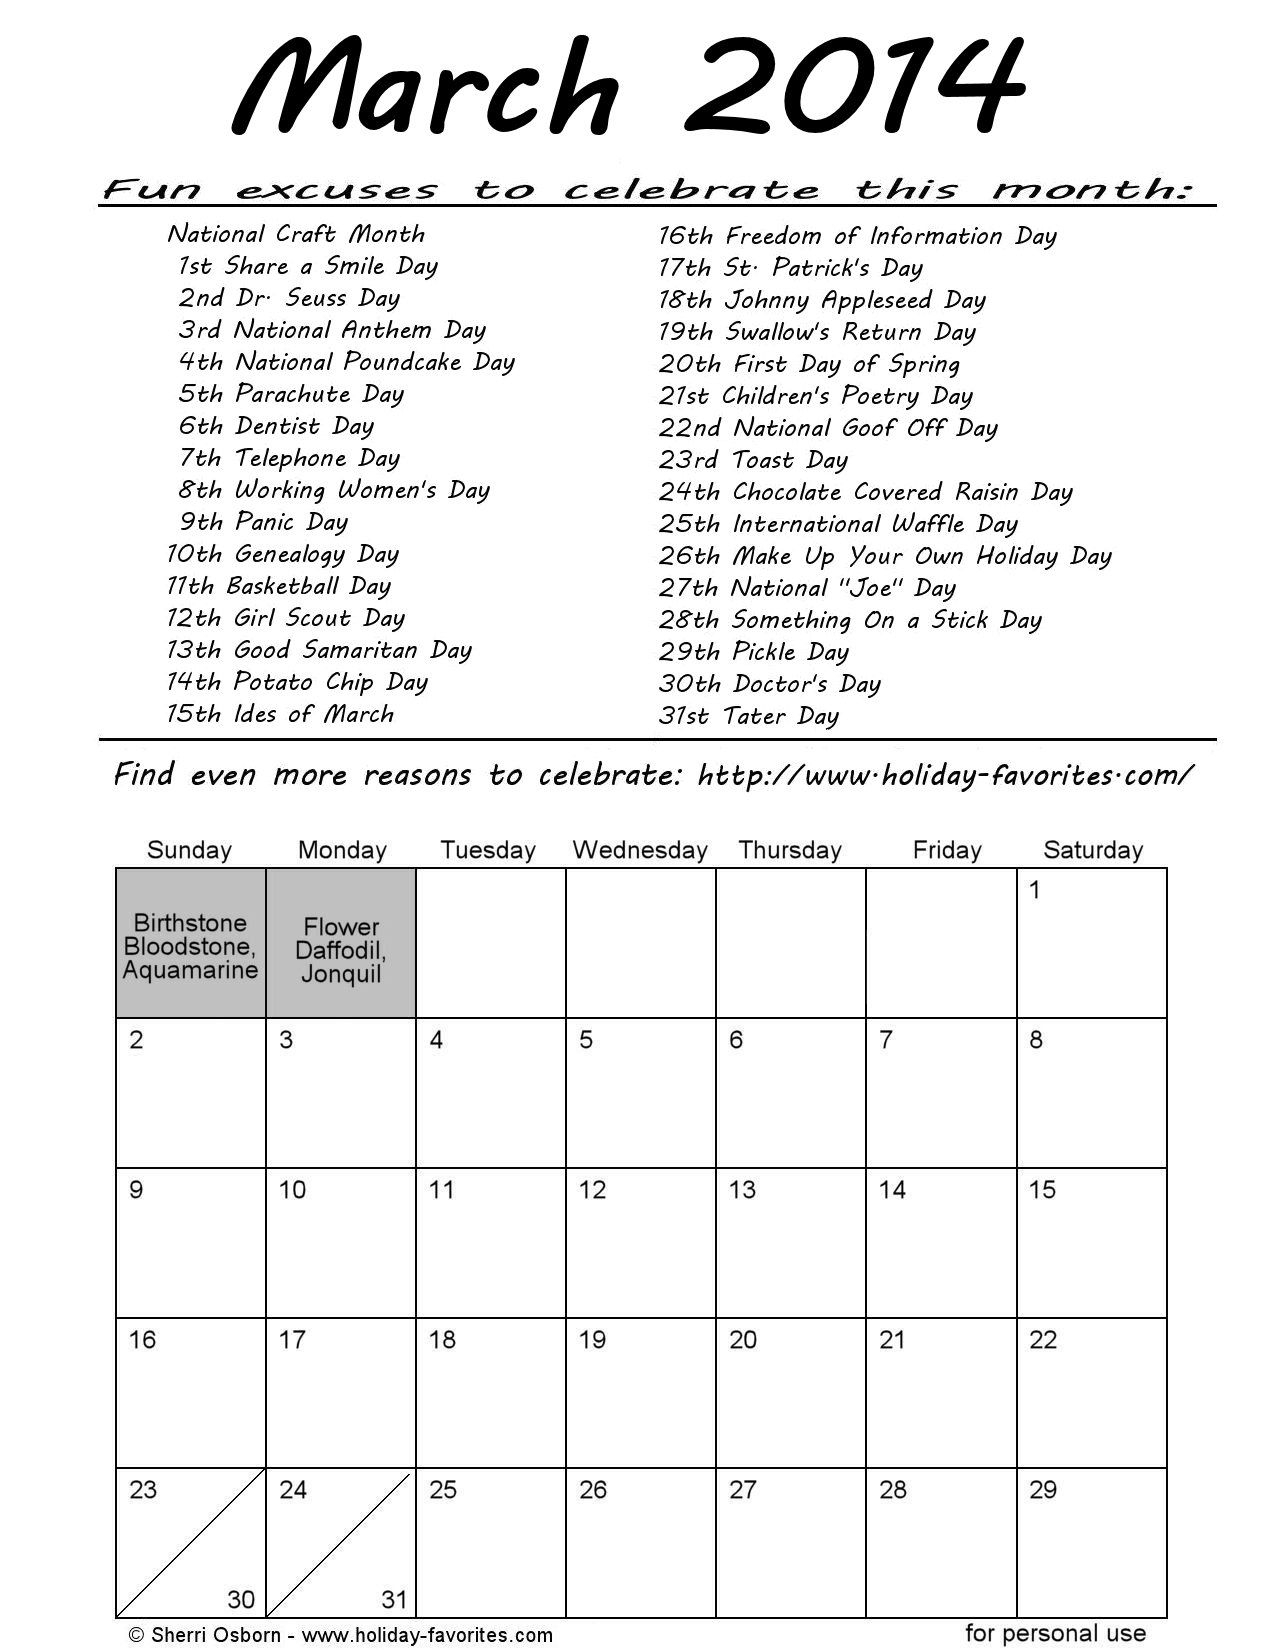 March Special Days Printable Calendar | Holiday Calendar intended for Special Days In The Calendar